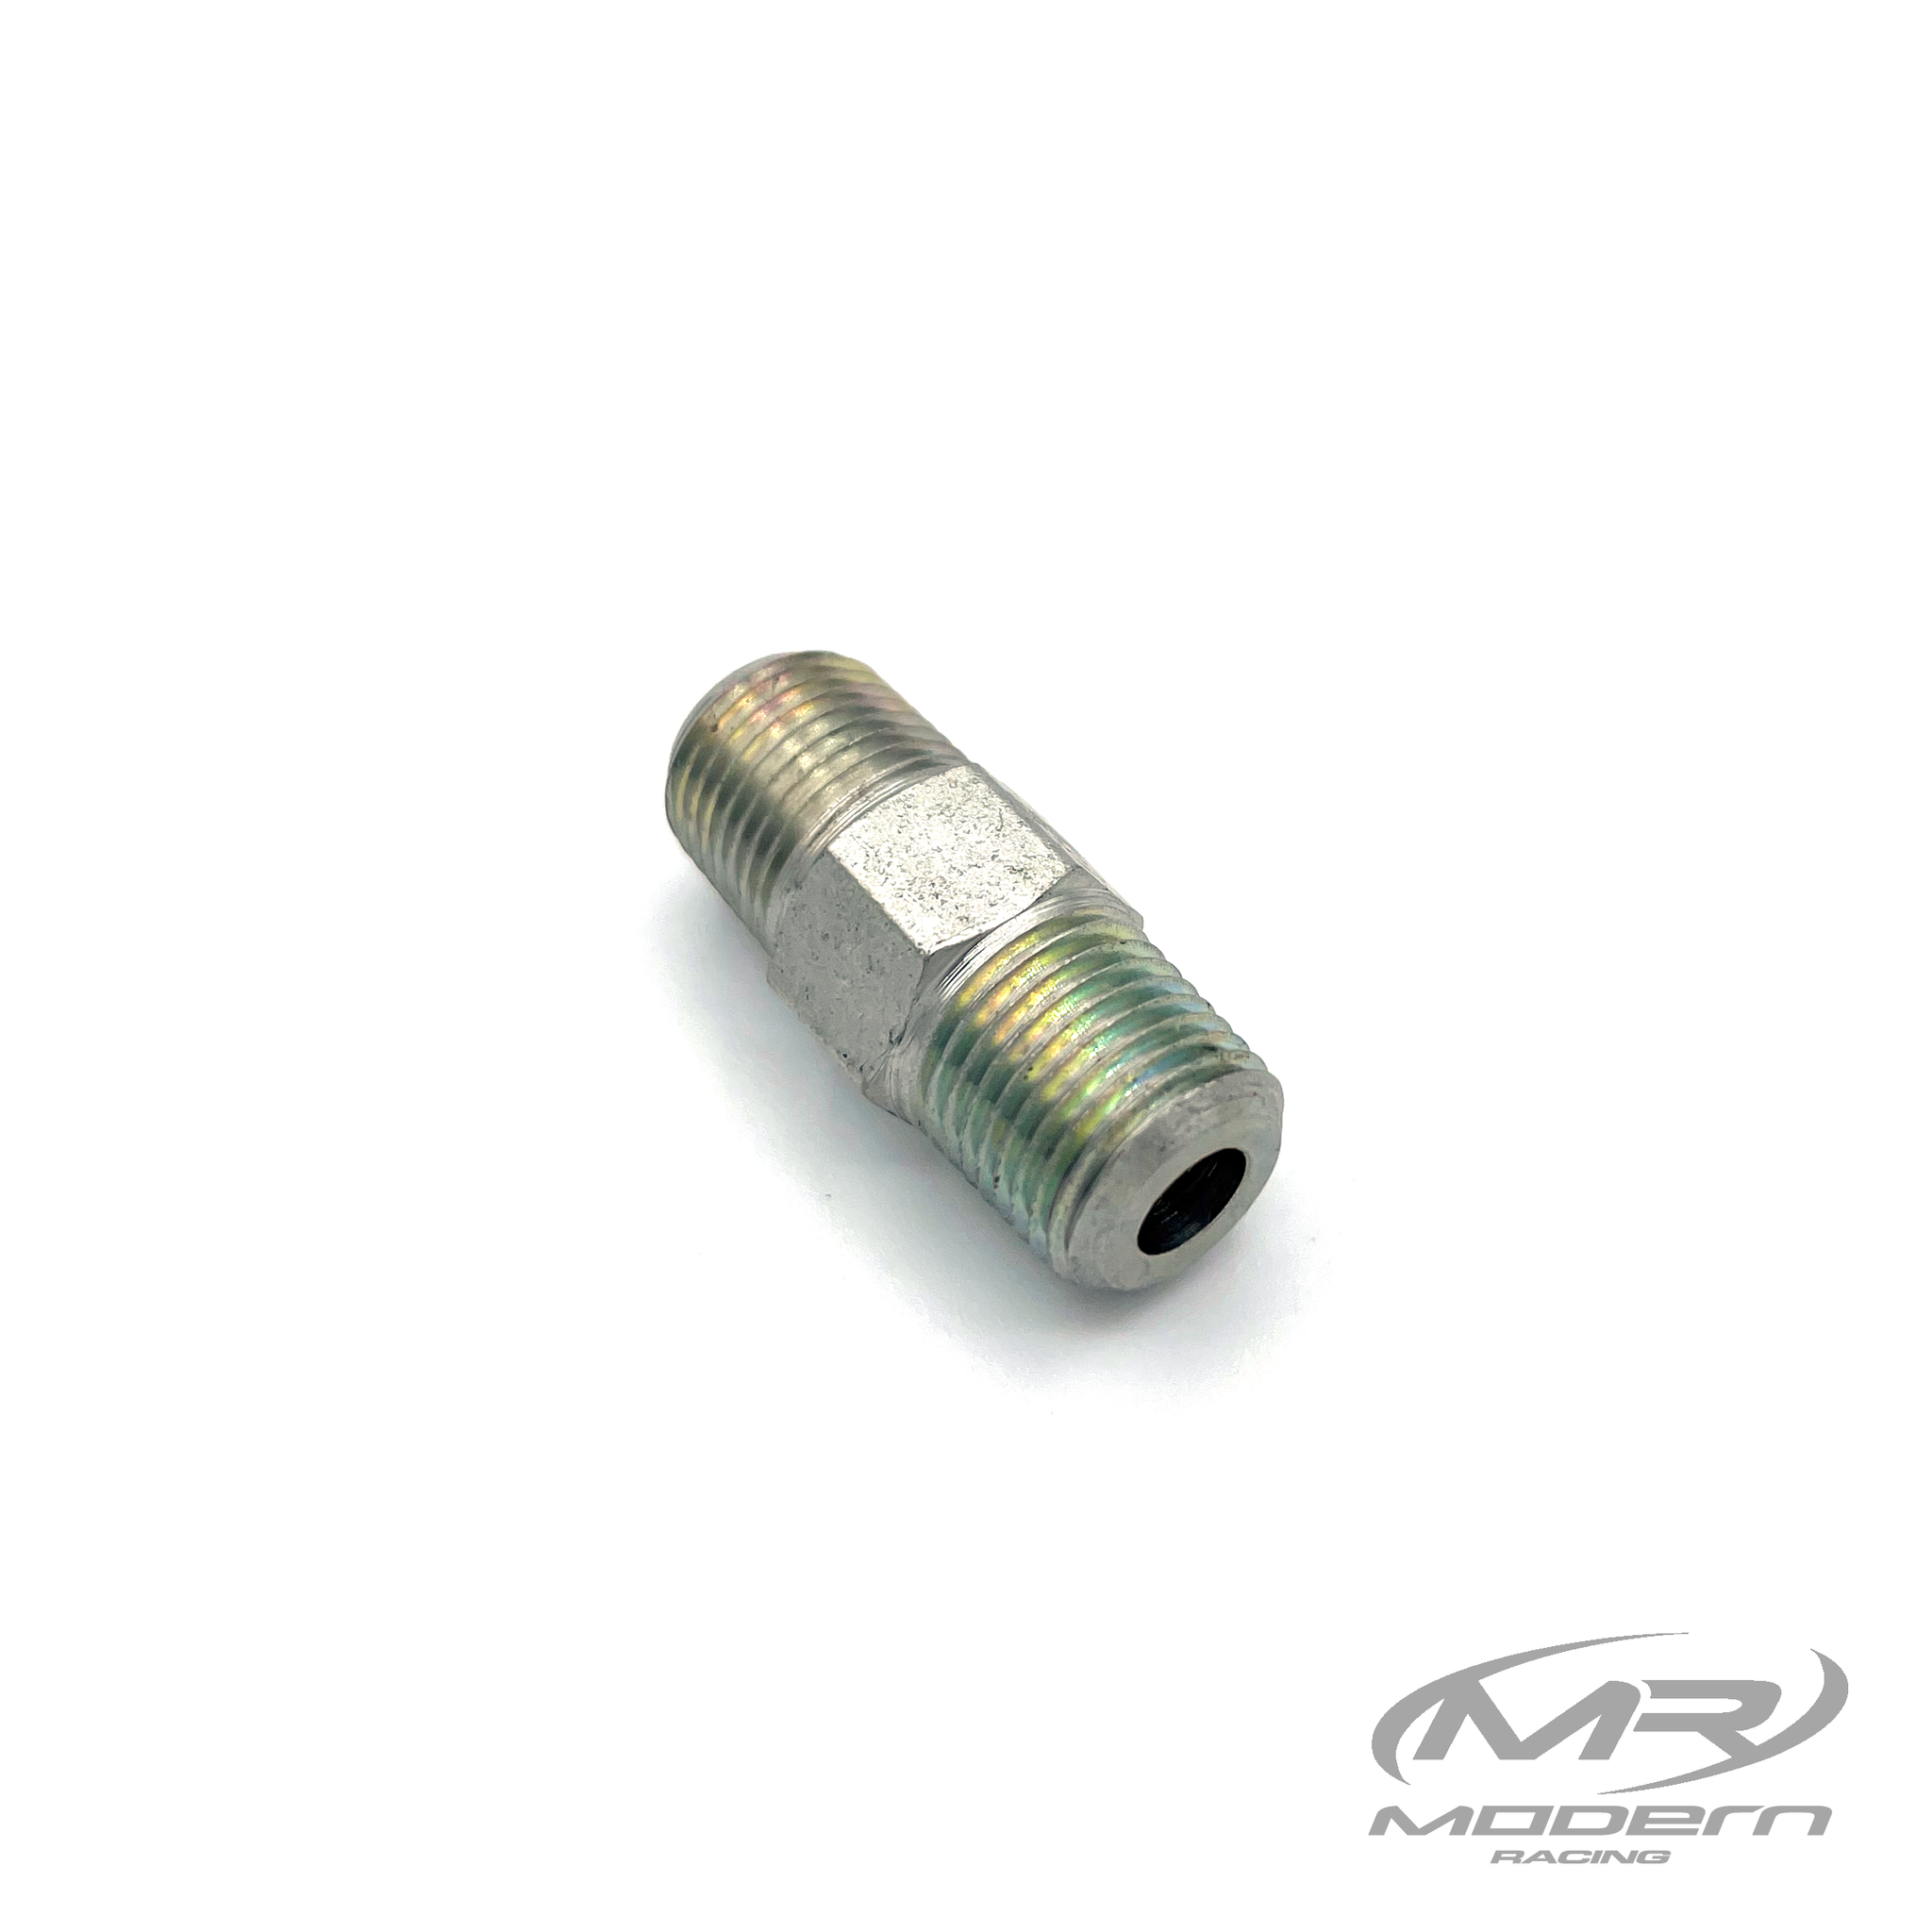 1/8 NPT Male To 1/8 NPT Male Straight Union Fitting Brass